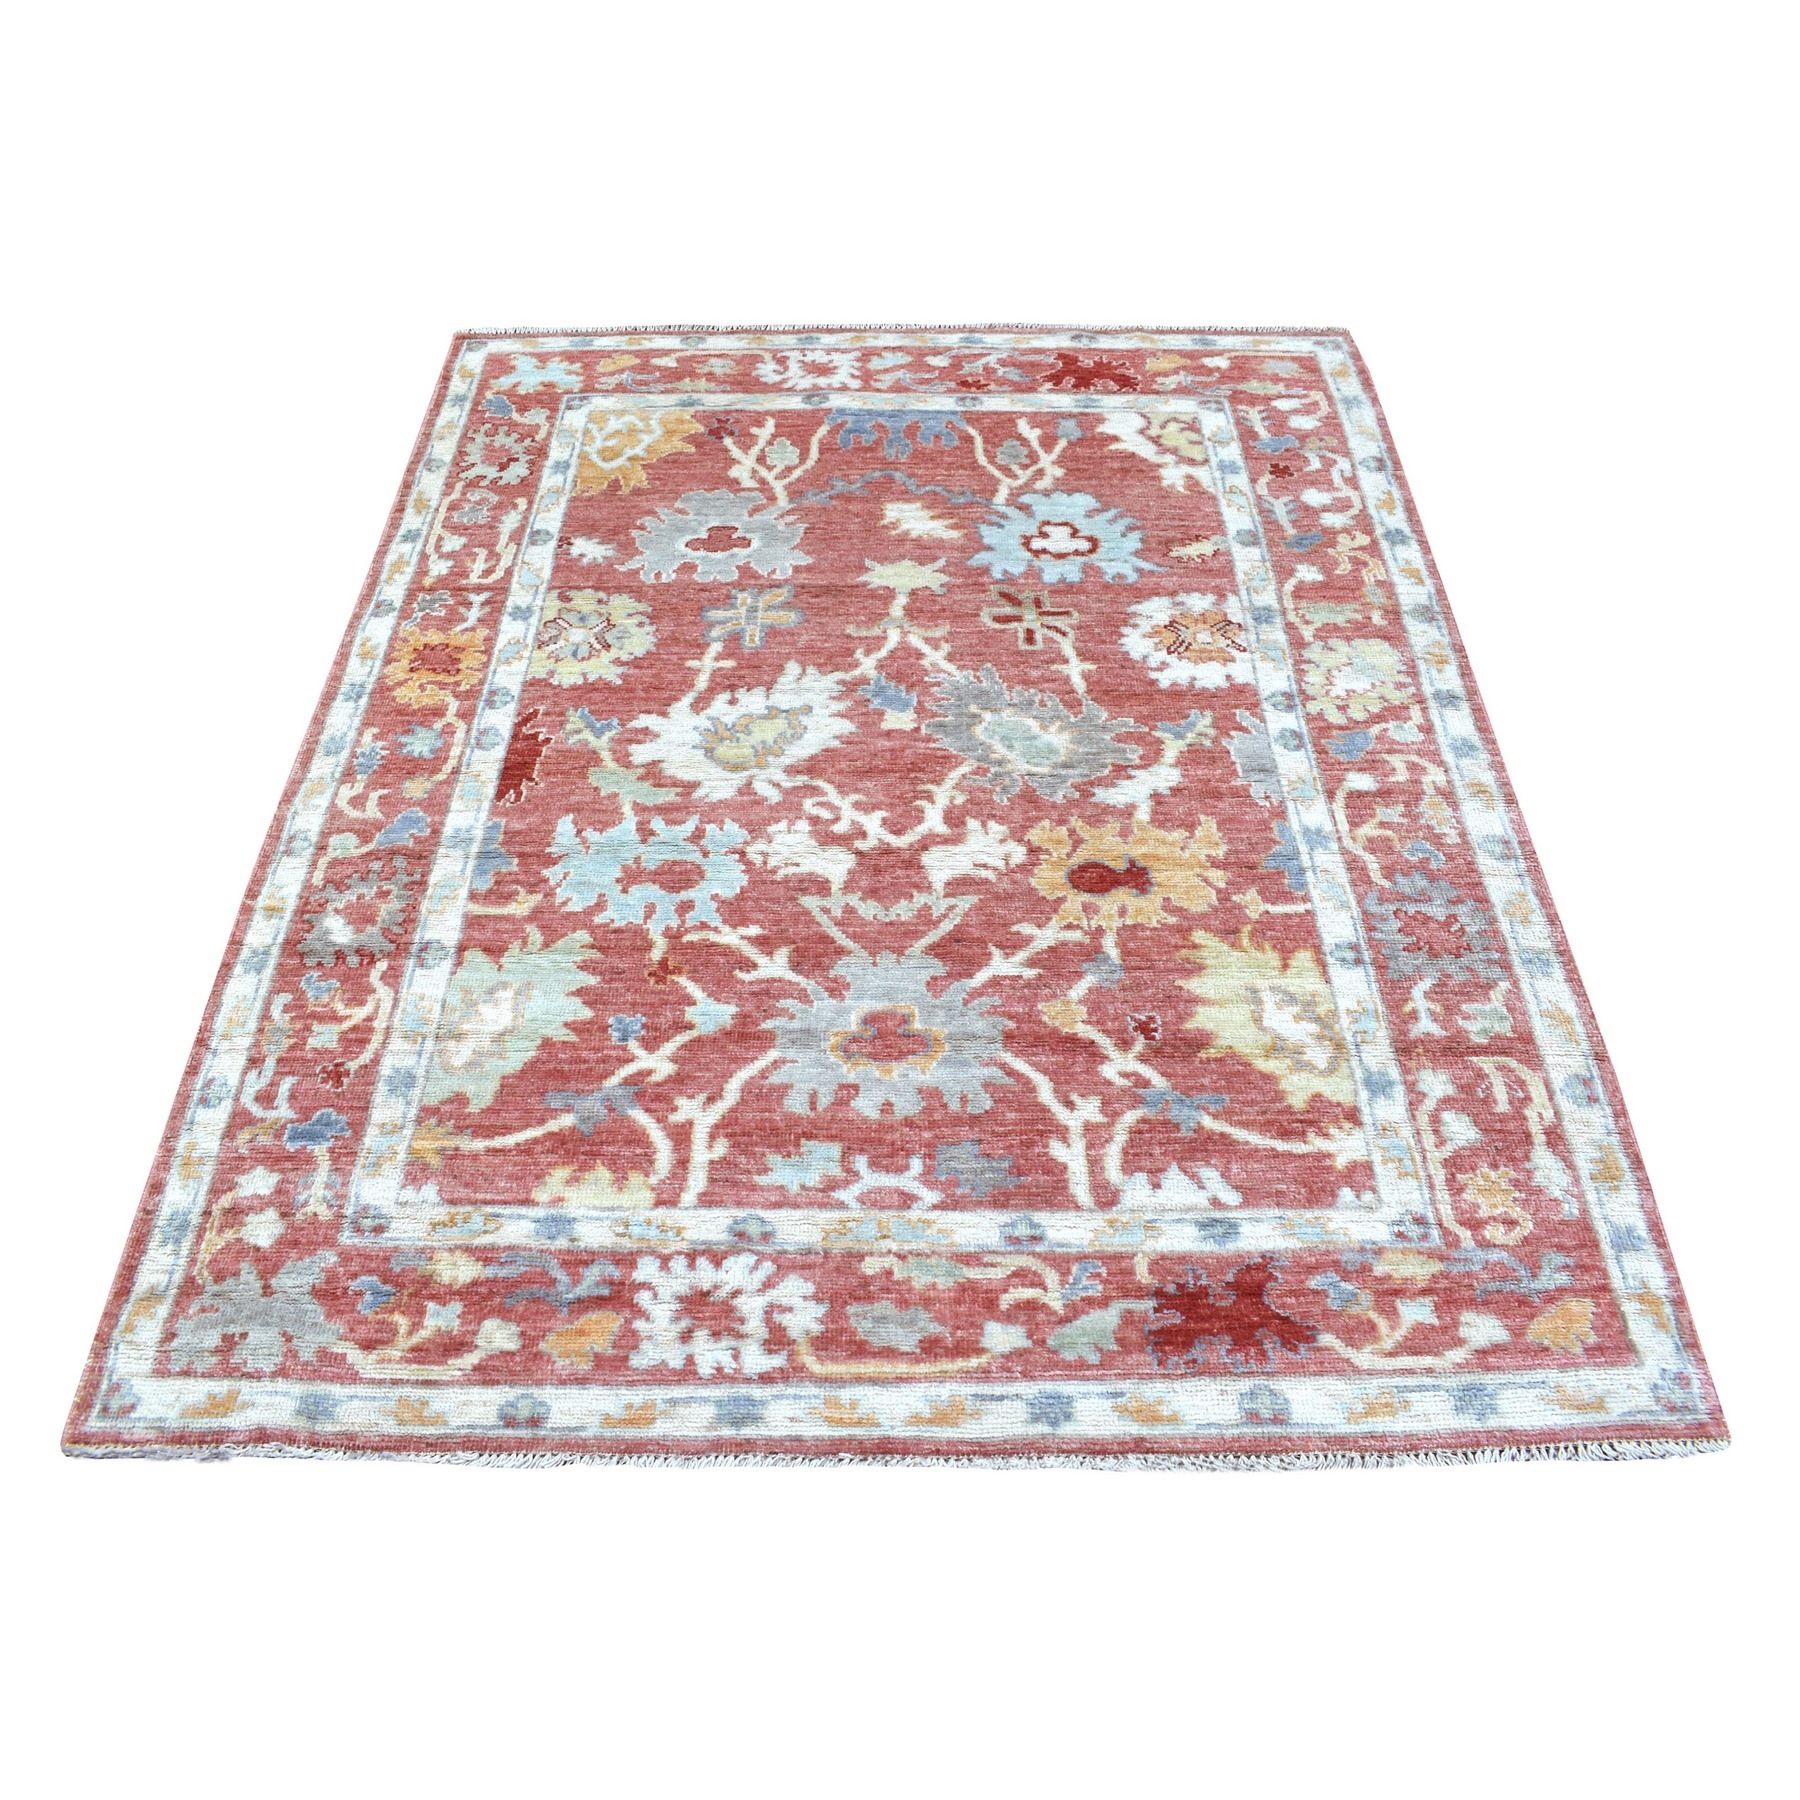 5'2"x6'6" Red Angora Oushak with Pop of Colors Hand Woven Soft to the Touch Wool Pile All Over Motifs Oriental Rug 